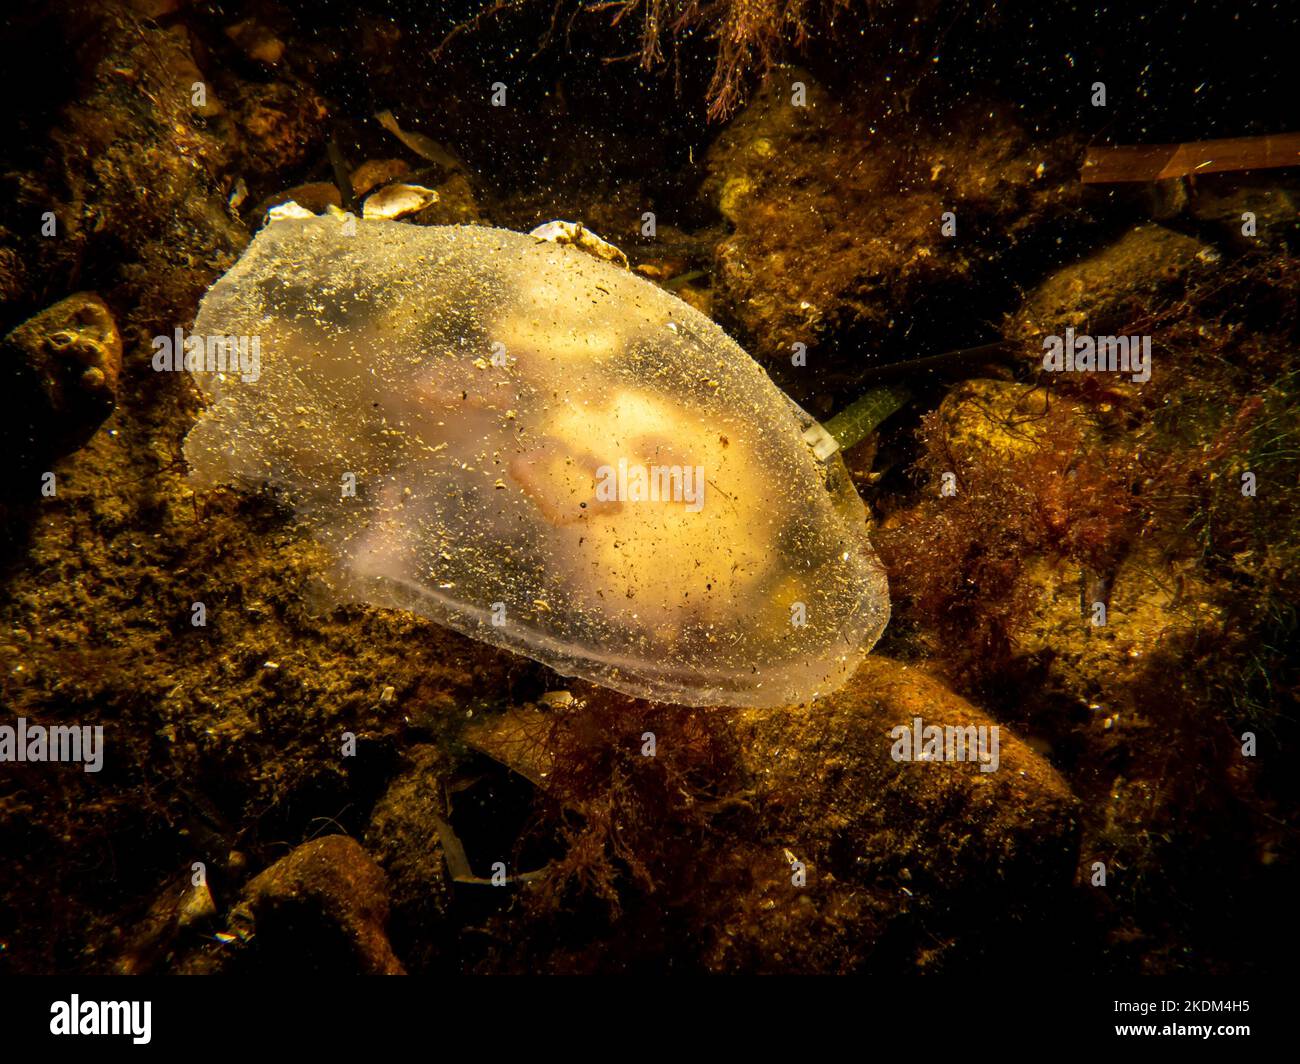 A close-up picture of a Moon jellyfish or Aurelia aurita with brown stones in the background. Picture from Oresund, Malmo Sweden. Cold water scuba diving Stock Photo